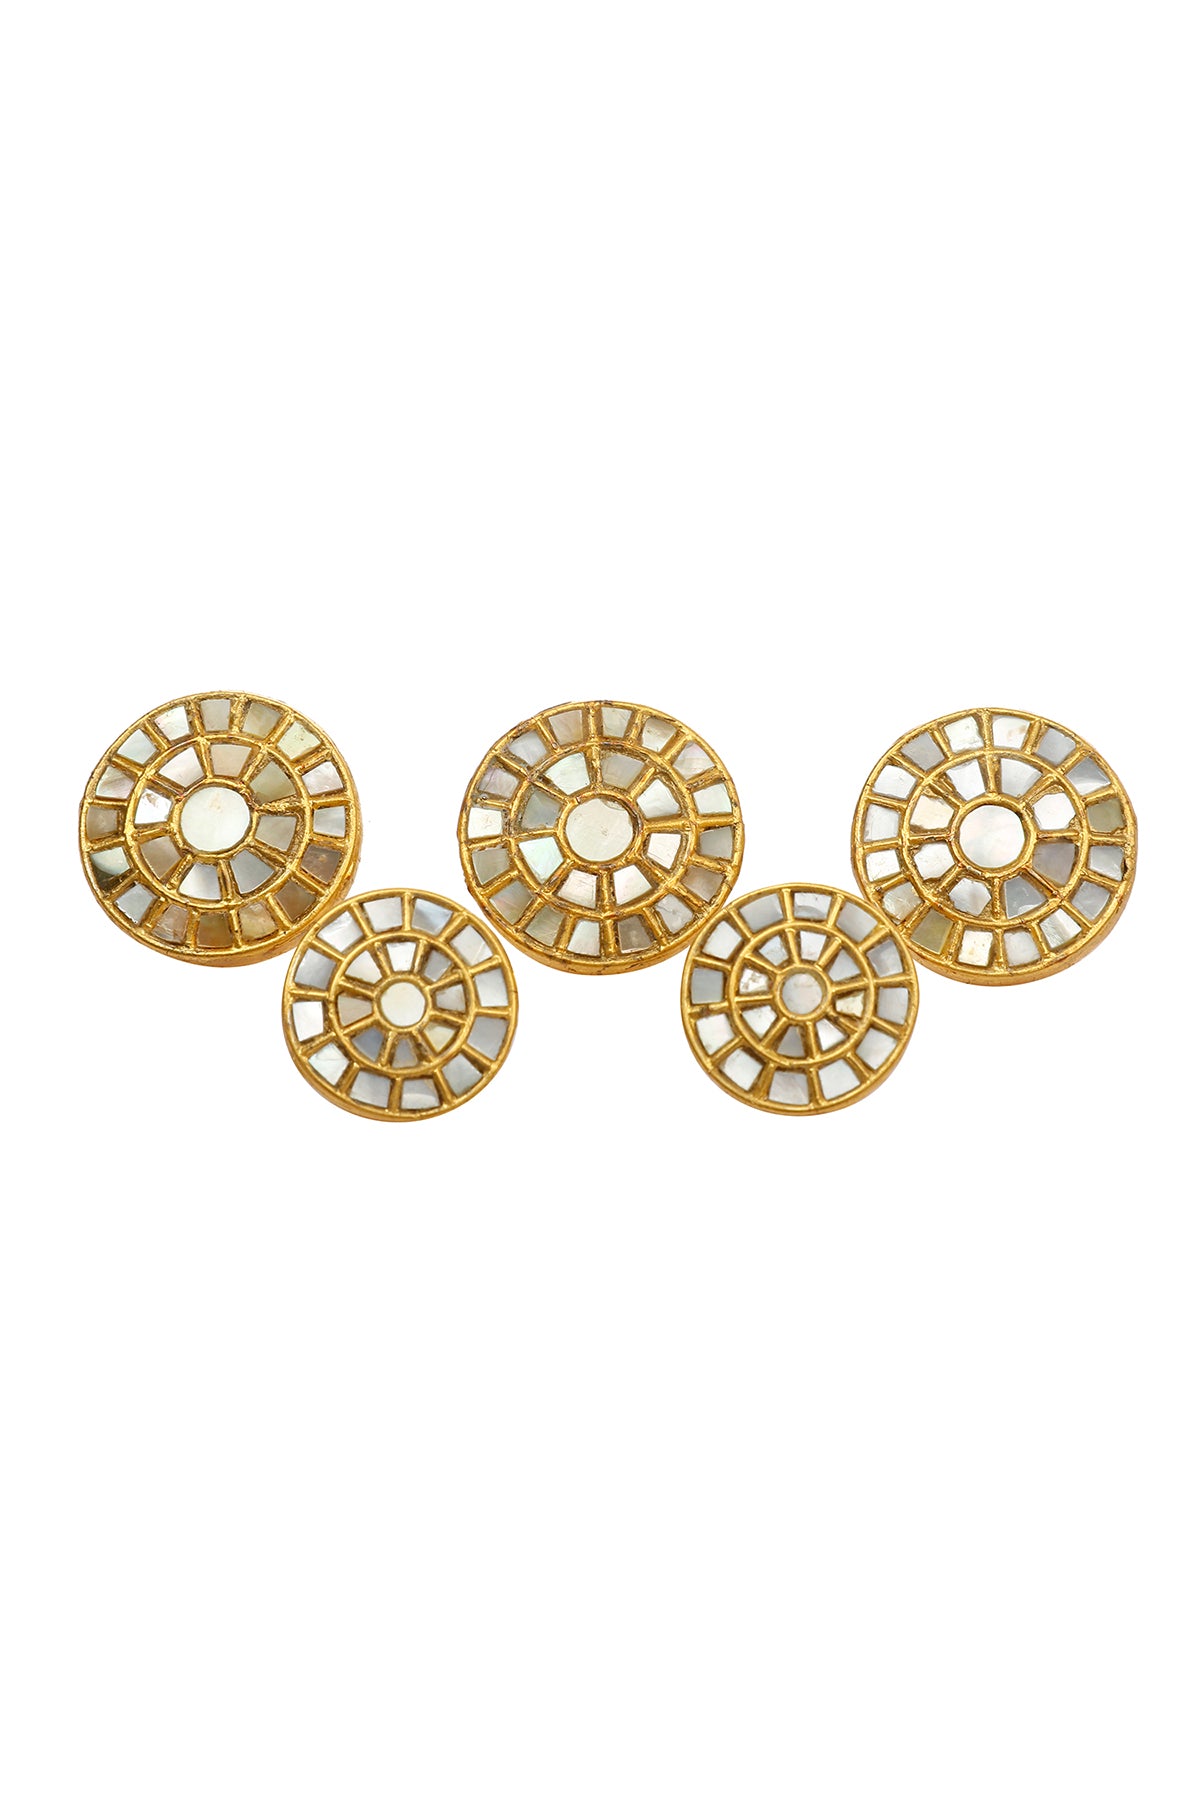 Mother of Pearl Button Set